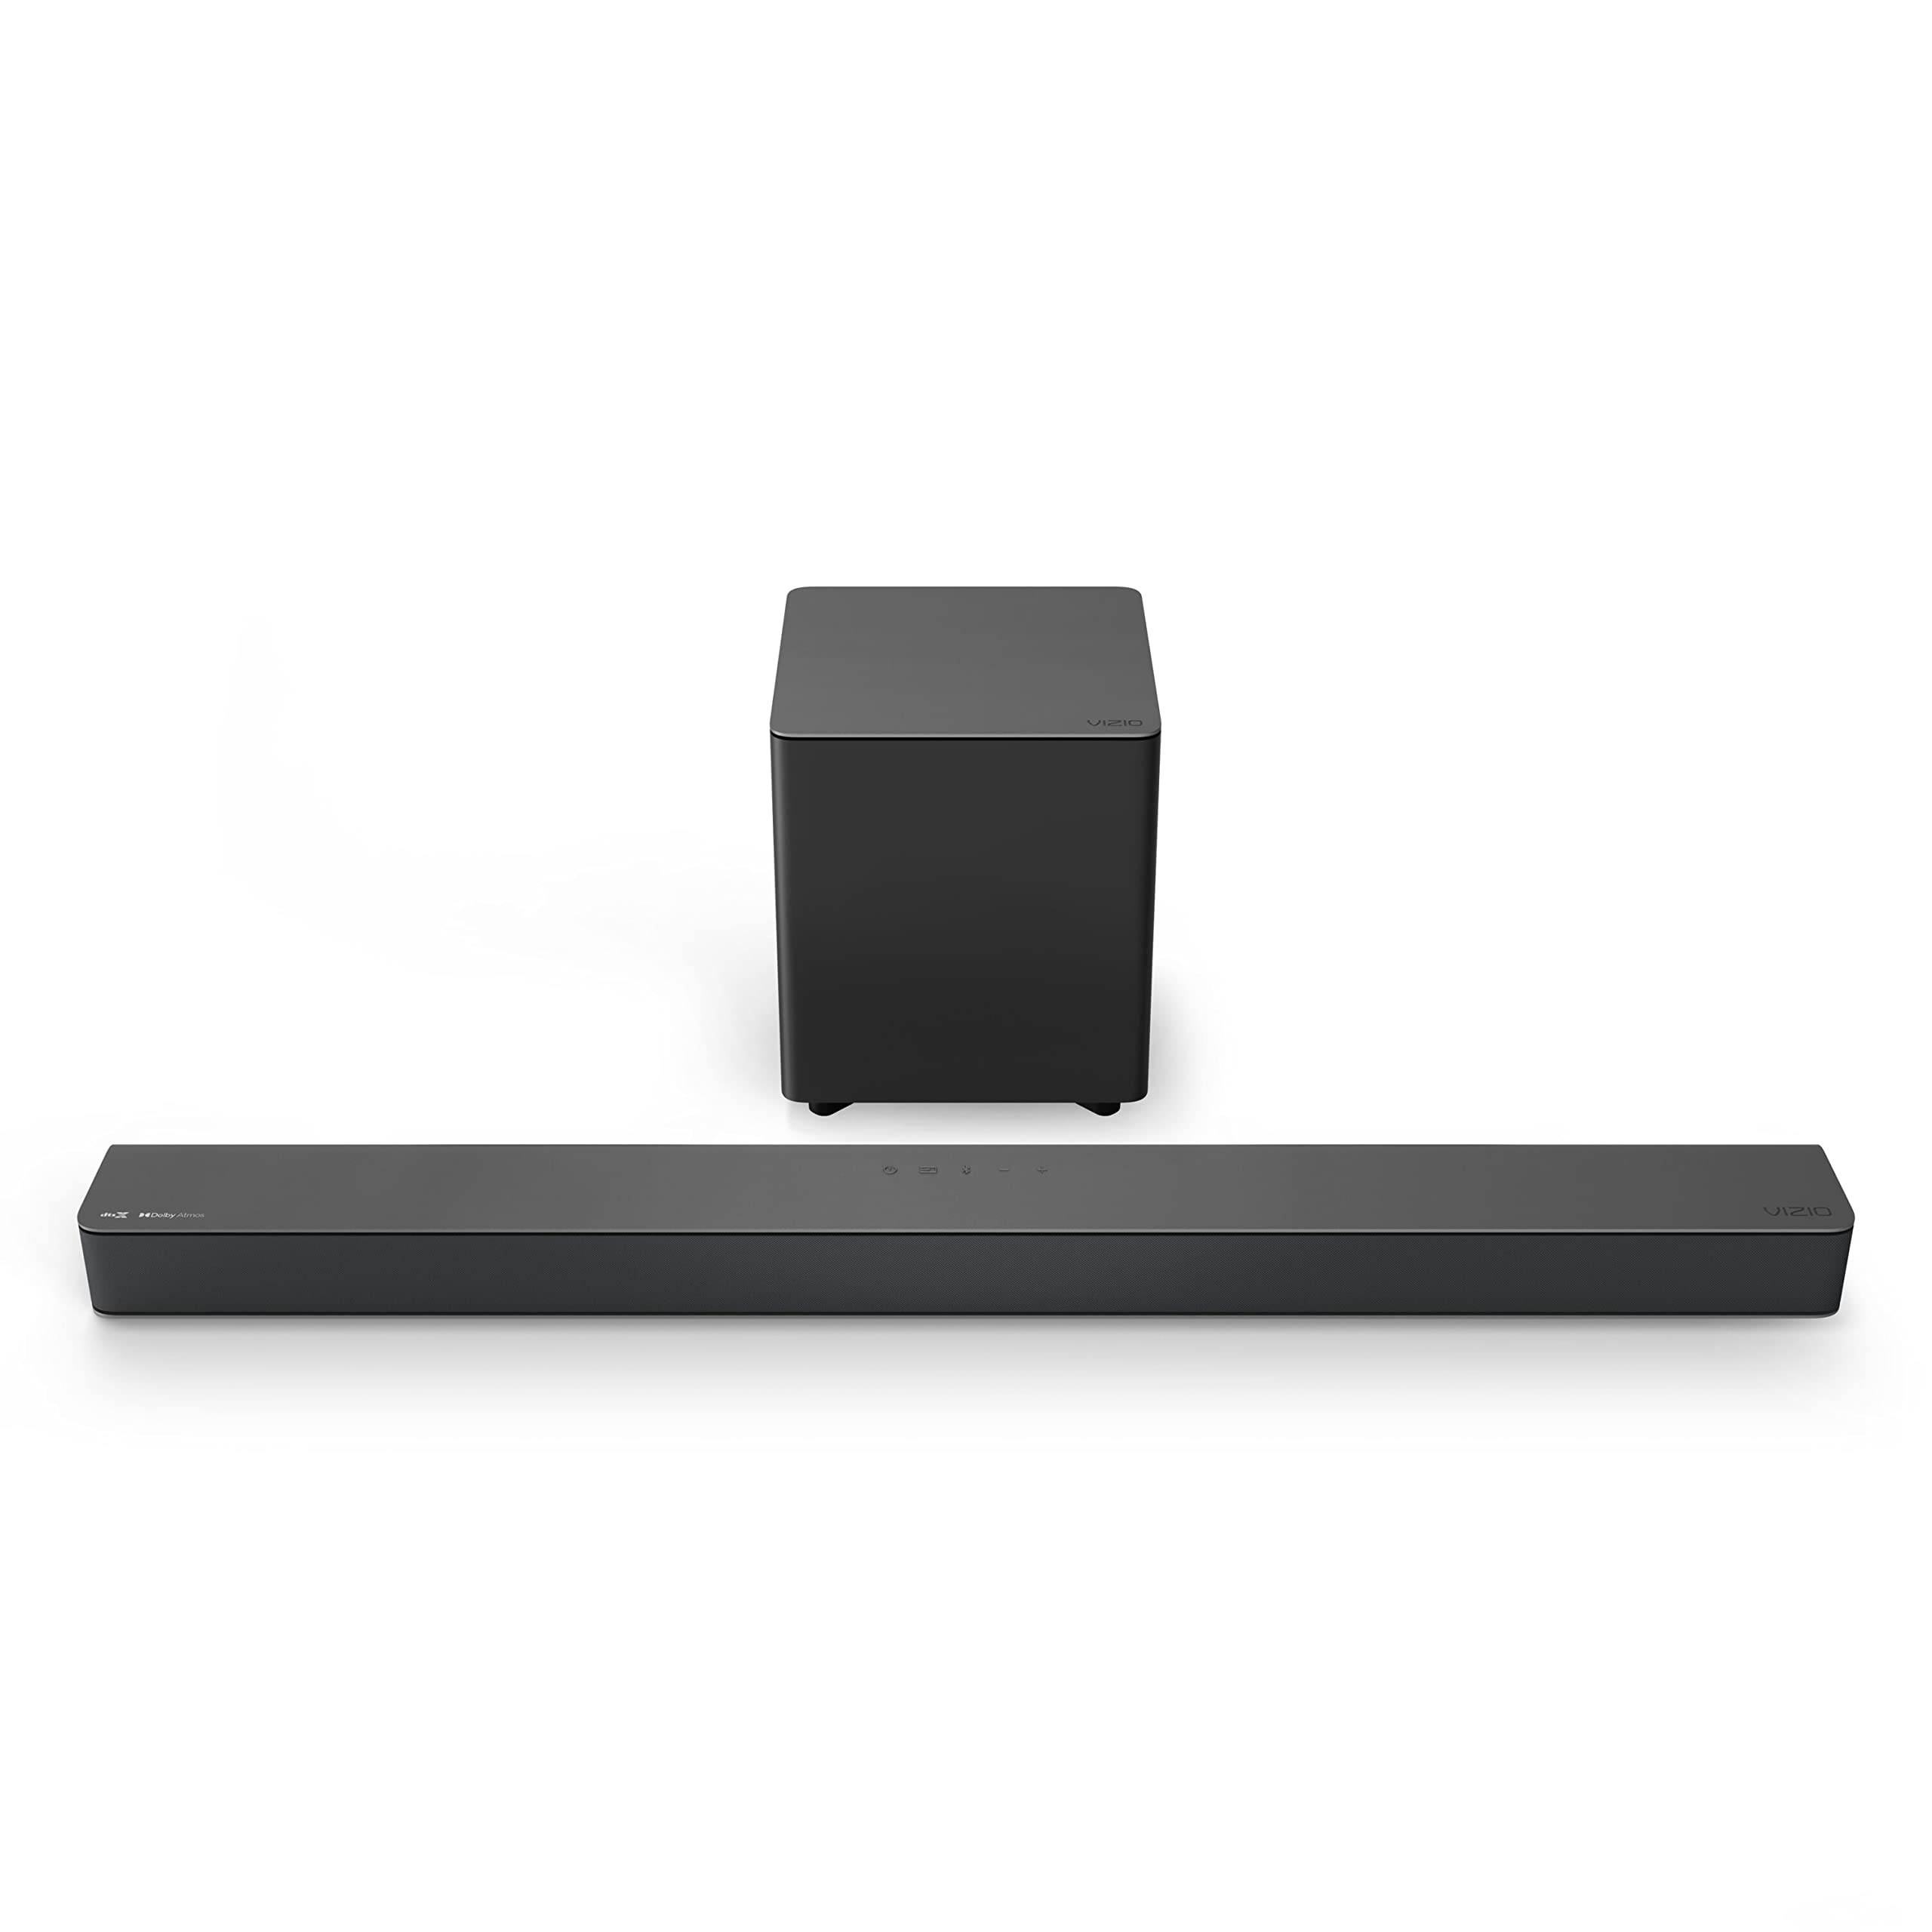 VIZIO M-Series 2.1 Immersive Sound Bar with 5 High-Performance Speakers, Dolby Atmos, DTS:X, Wireless Subwoofer and Alexa Compatibility, M215aw-K6, 2023 Model $180